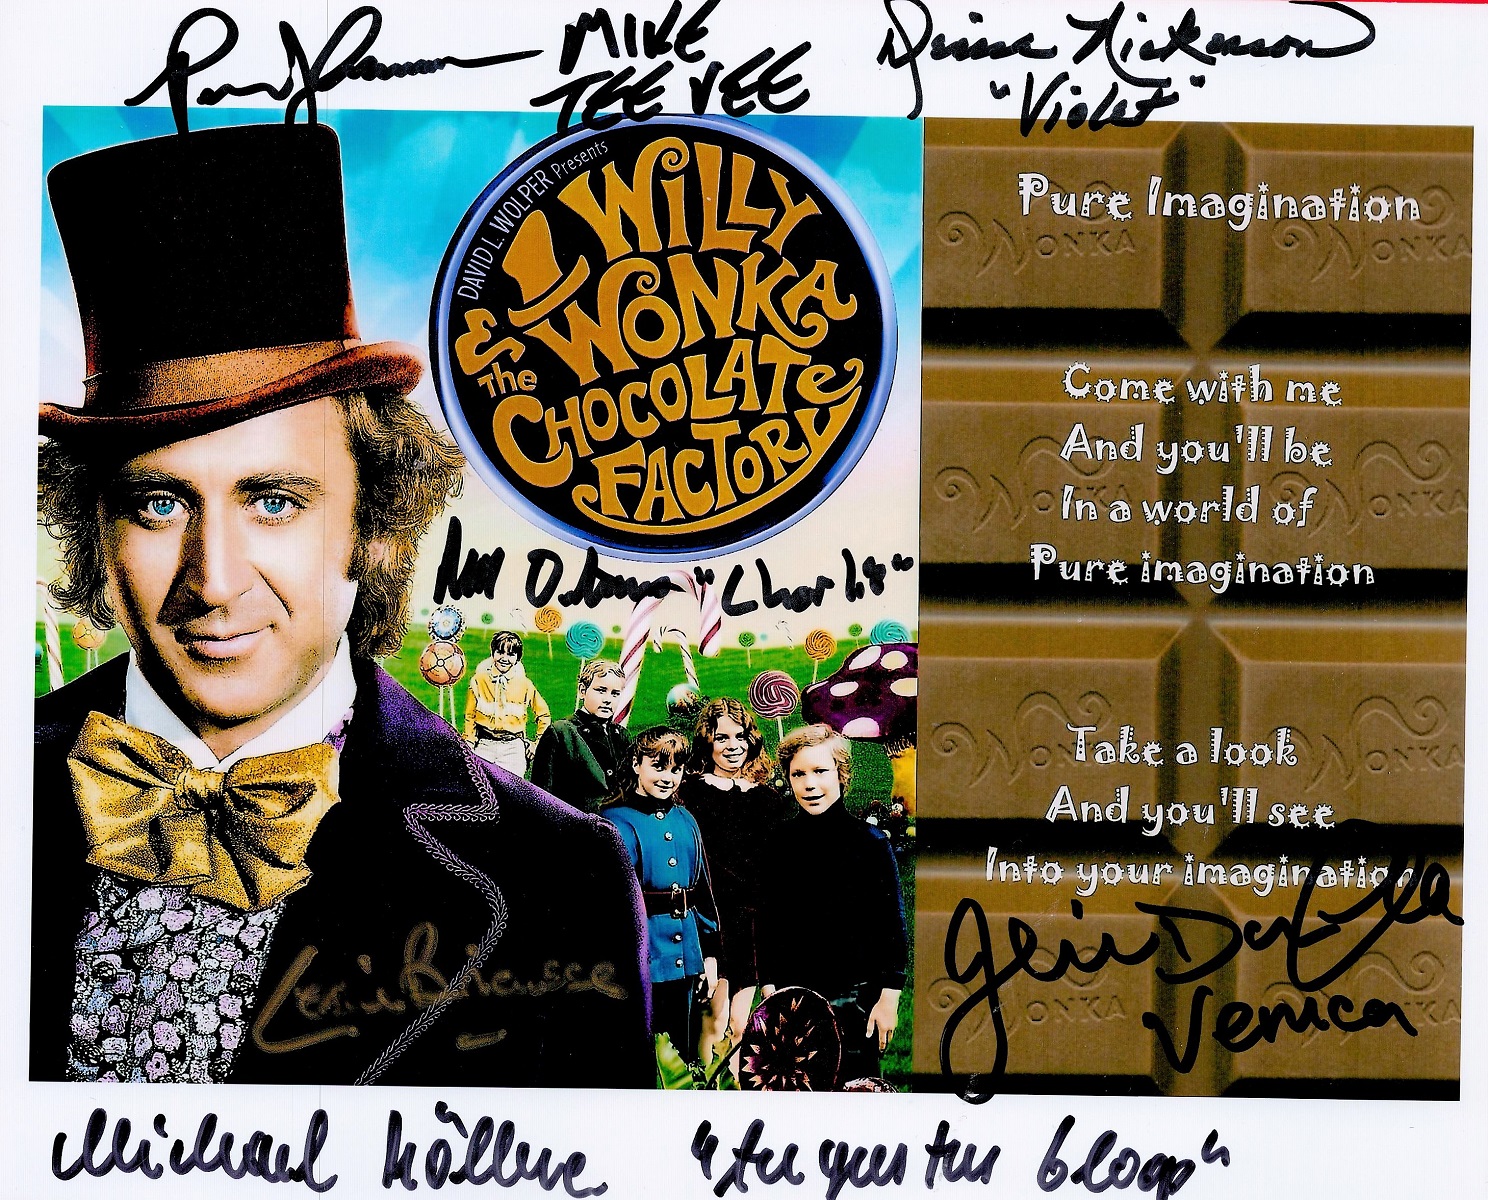 Willy Wonka multi signed 10x8 colour photo includes 5 signatures from the 1971 film includes Paul